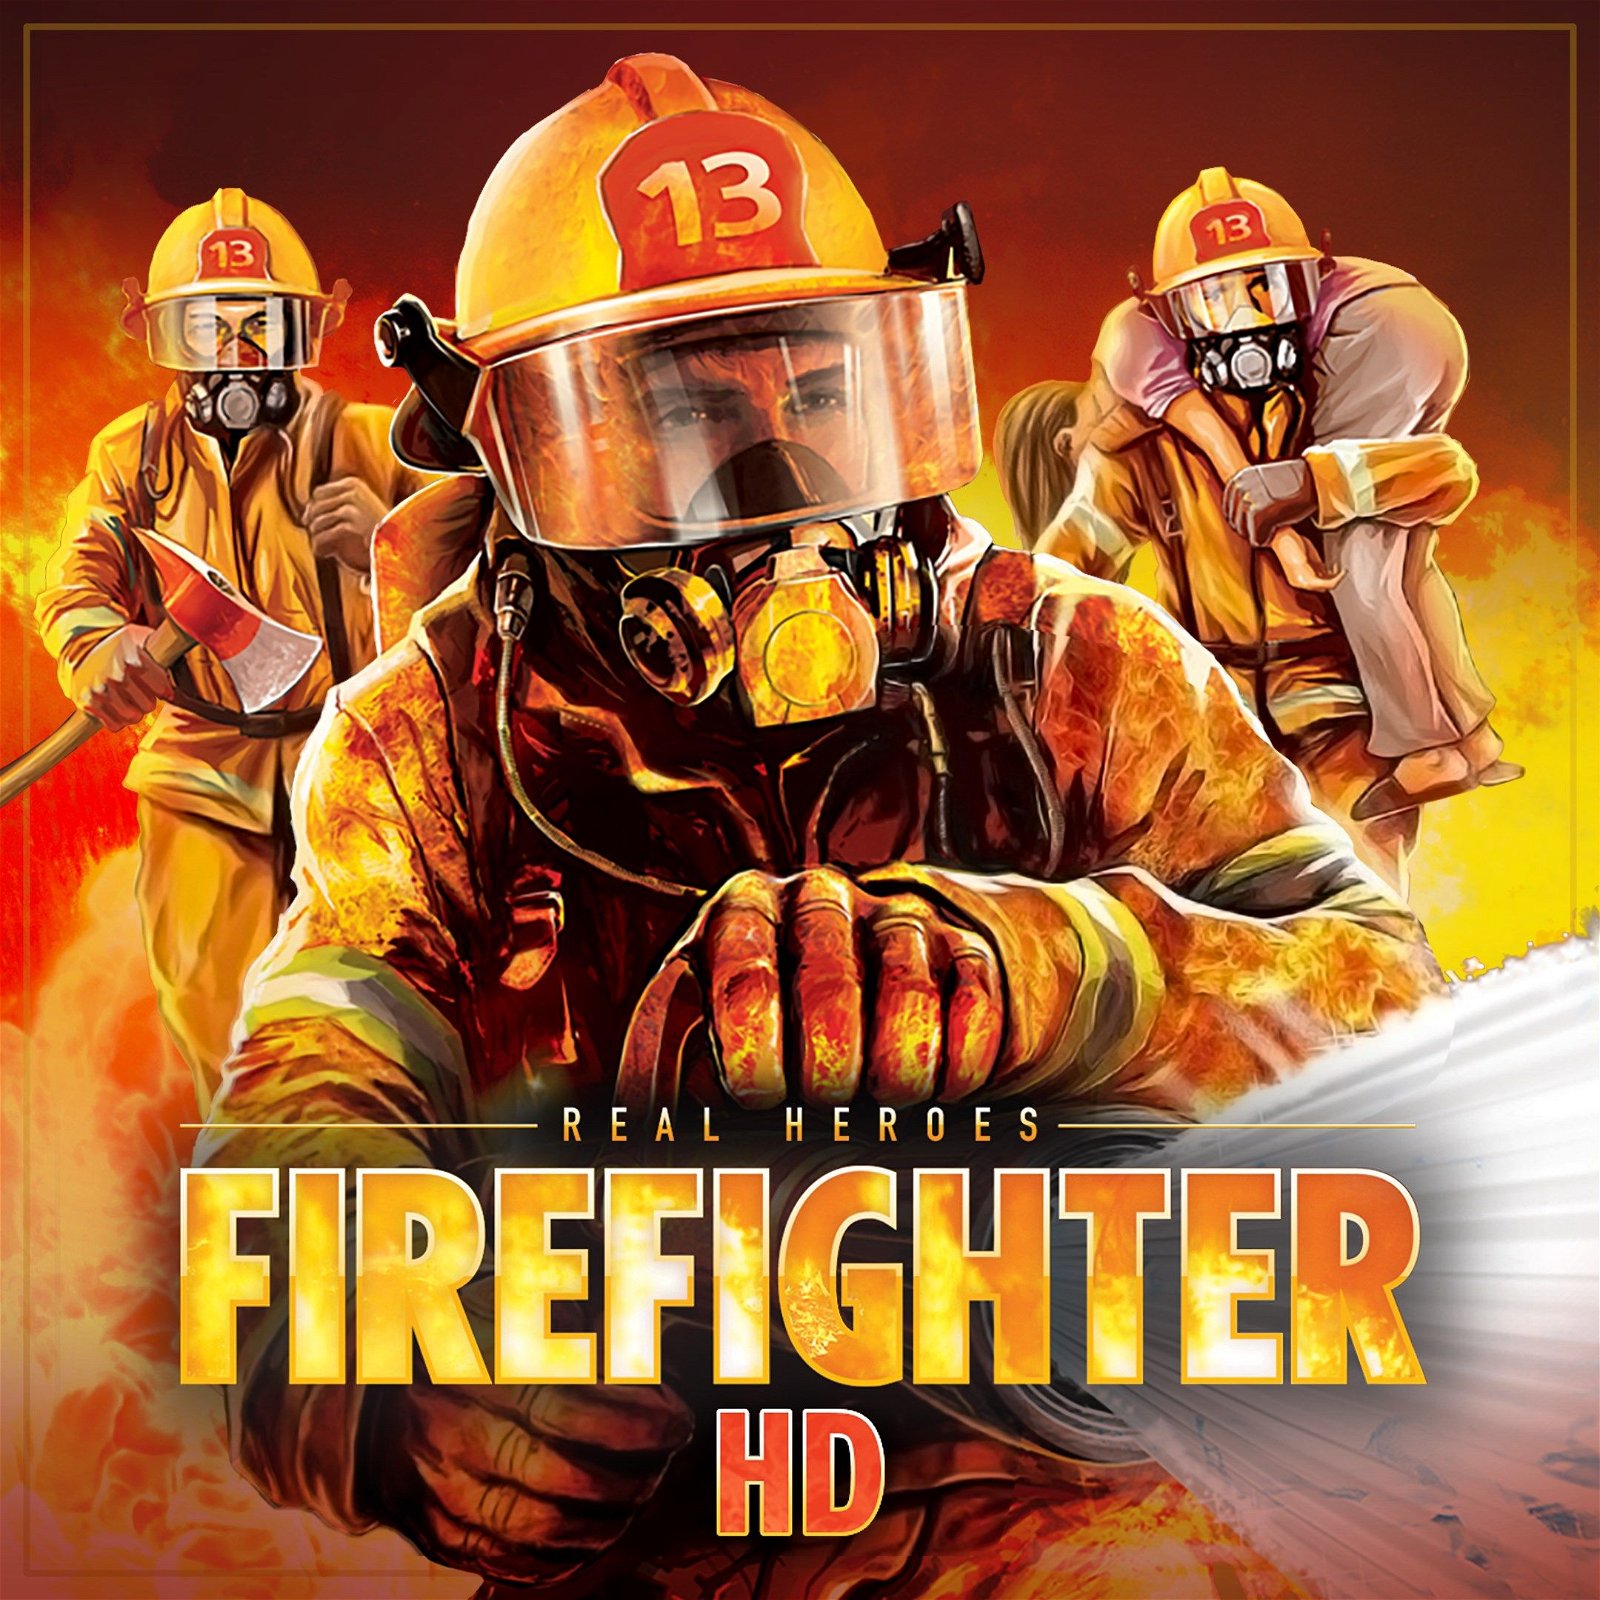 Image of Real Heroes: Firefighter HD